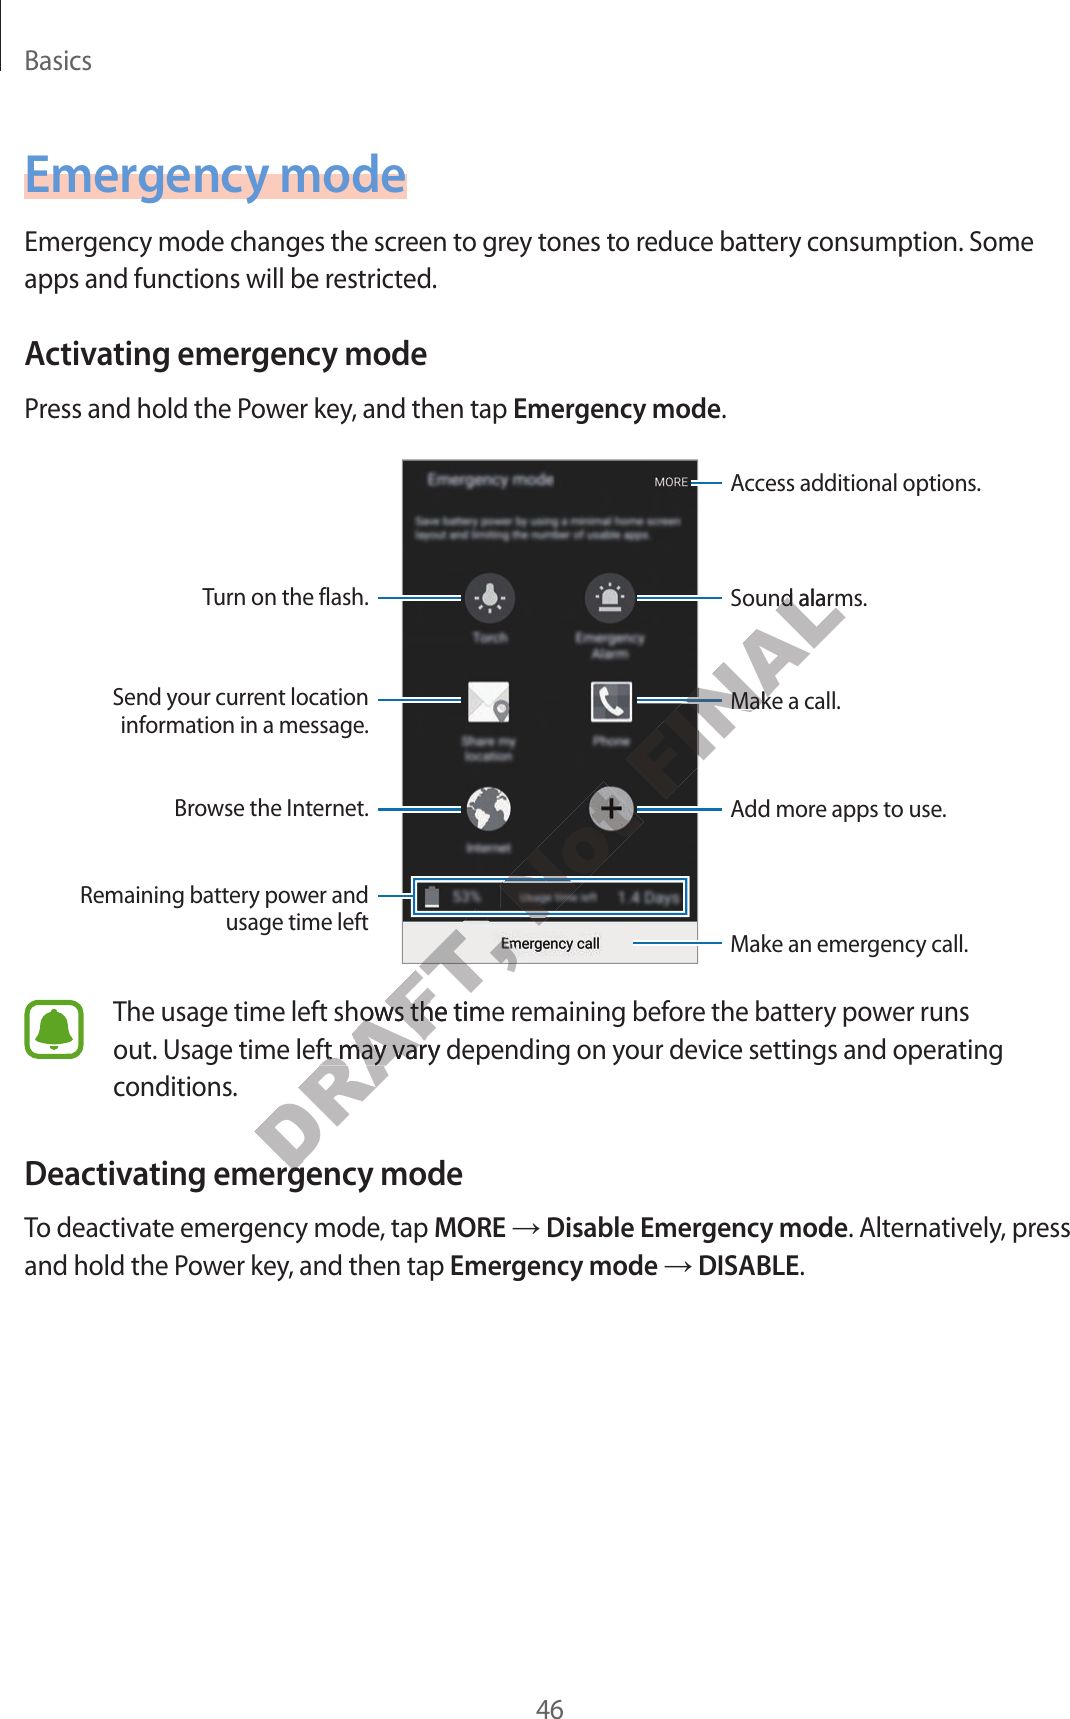 Basics46Emergency modeEmergency mode changes the screen to grey tones to reduce battery consumption. Some apps and functions will be restricted.Activating emergency modePress and hold the Power key, and then tap Emergency mode.Add more apps to use.Make an emergency call.Remaining battery power and usage time leftTurn on the flash.Make a call.Send your current location information in a message.Browse the Internet.Access additional options.Sound alarms.The usage time left shows the time remaining before the battery power runs out. Usage time left may vary depending on your device settings and operating conditions.Deactivating emergency modeTo deactivate emergency mode, tap MORE → Disable Emergency mode. Alternatively, press and hold the Power key, and then tap Emergency mode → DISABLE.DRAFT, DRAFT, DRAFT, DRAFT, DRAFT, t shows the time rt shows the time rsage time left may vary depending on ysage time left may vary depending on yting emergencting emergencNot Not FINALFINALFINALFINALMake a callMake a callound alarmsound alar